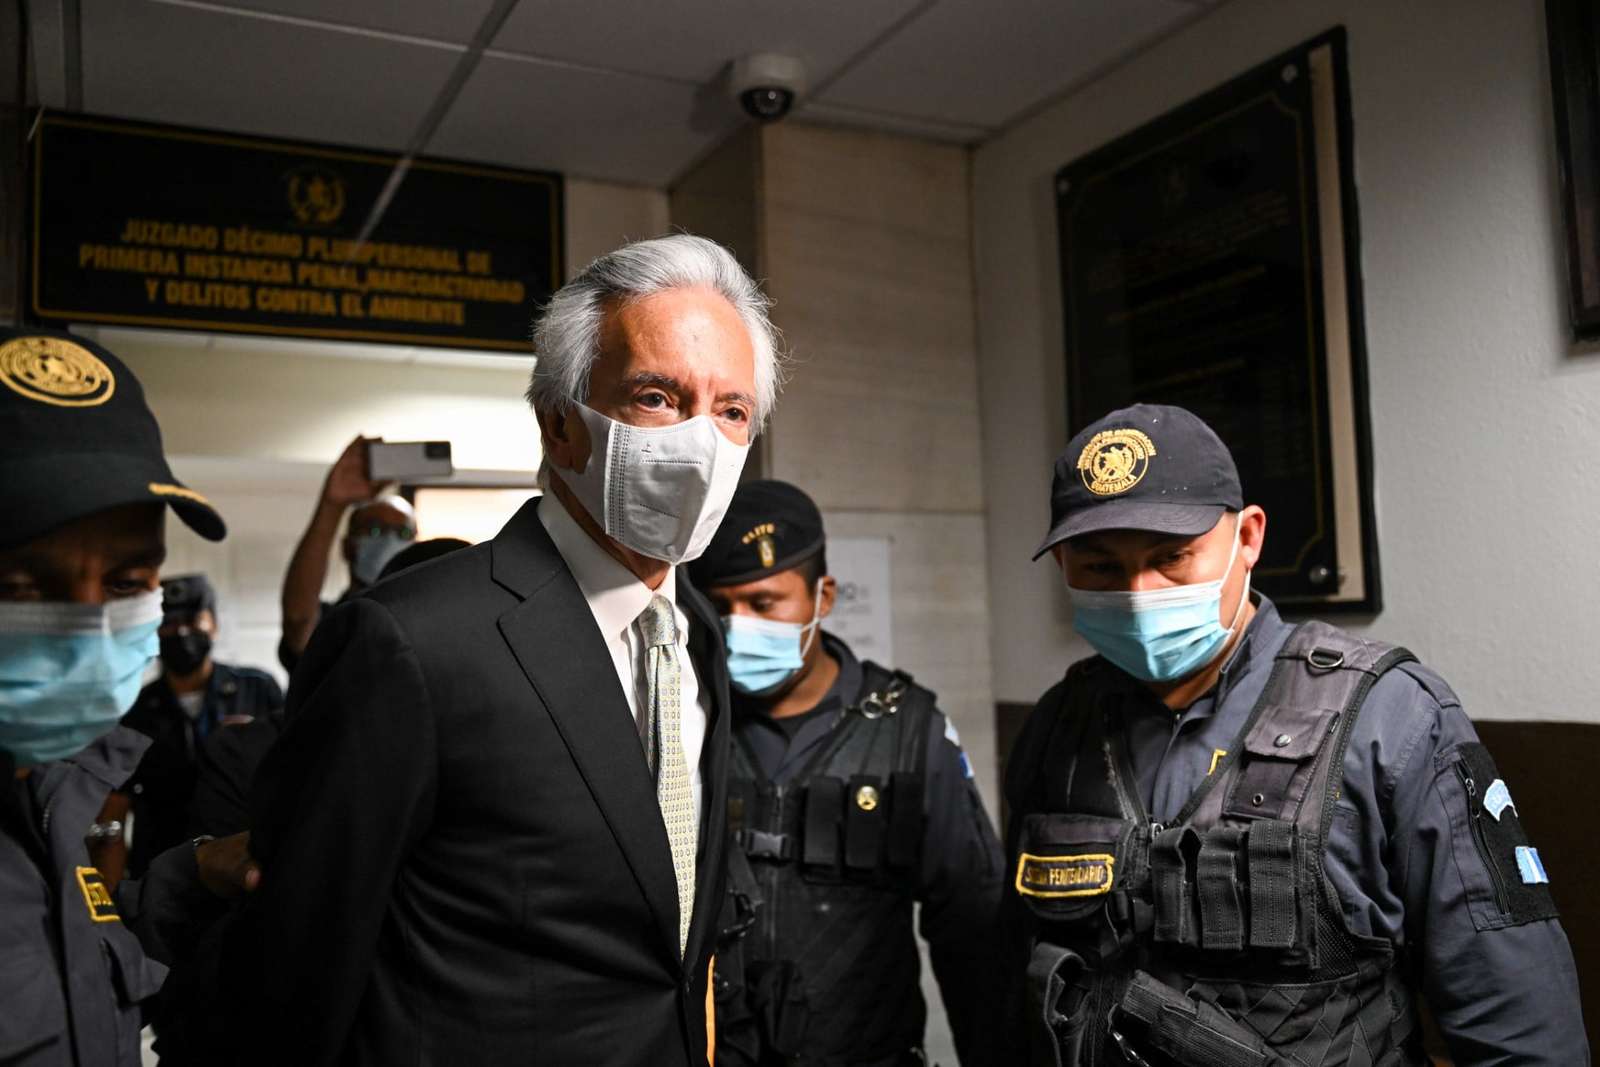 Guatemalan journalist Jose Ruben Zamora, President of the newspaper "El Periodico", is escorted by the police after a hearing in Guatemala City, on January 31, 2023. (Photo by Johan ORDONEZ / AFP)